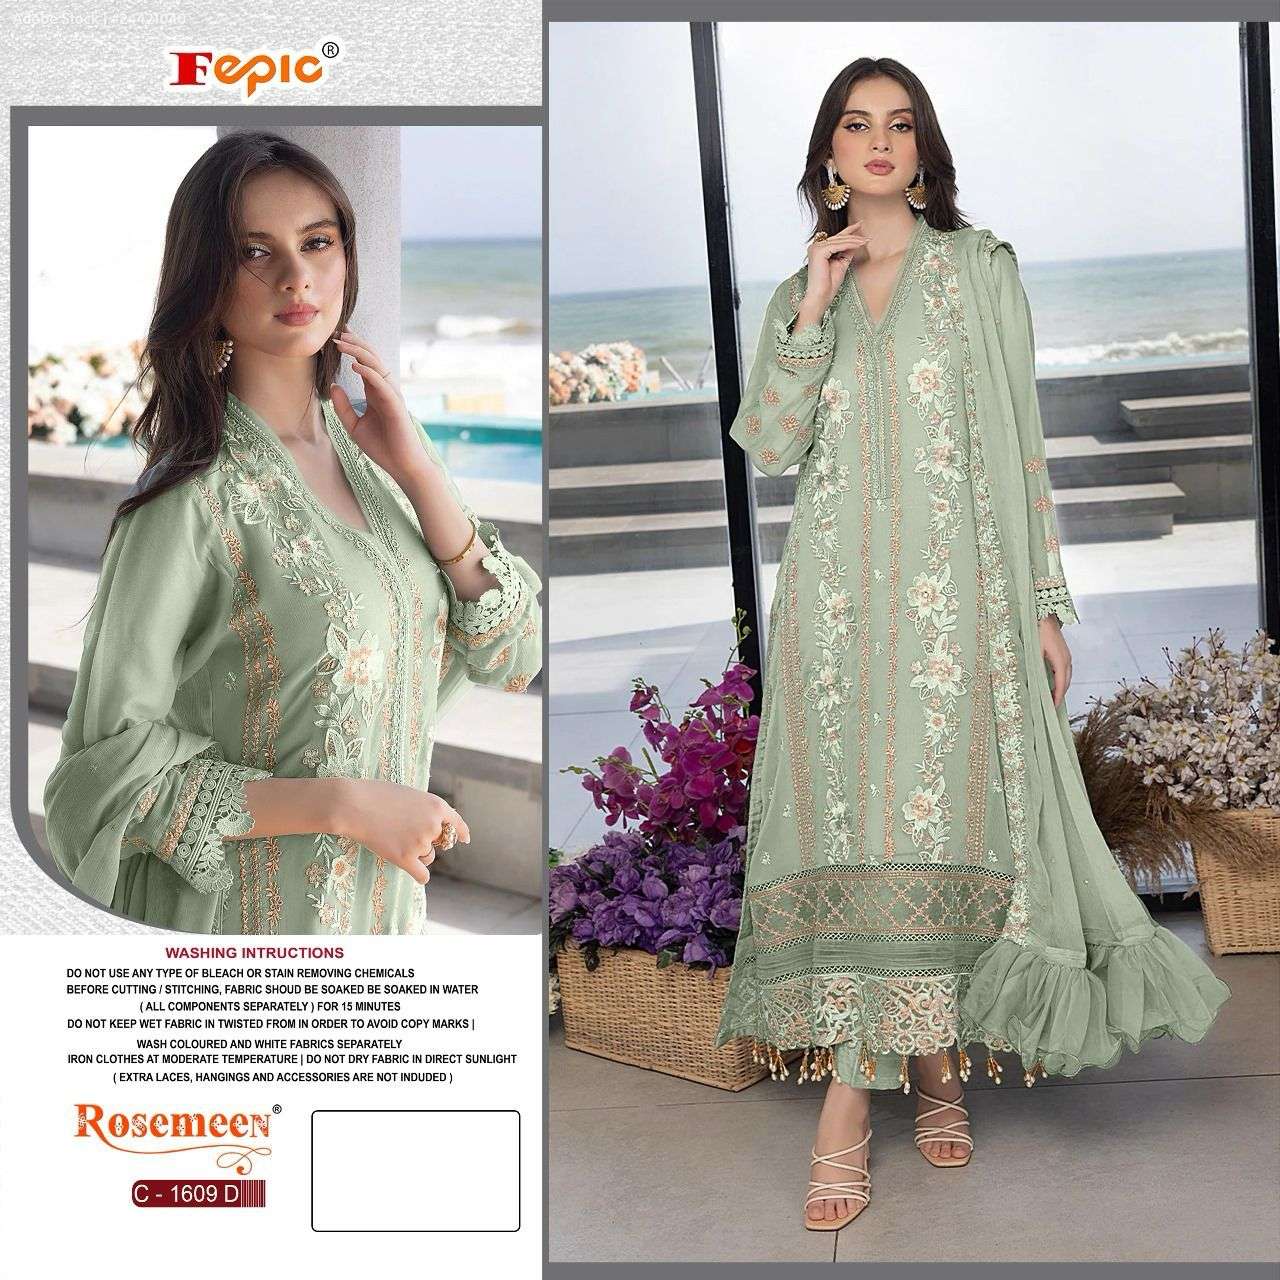 ROSEMEEN C-1609 COLOURS BY FEPIC 1609-D TO 1609-F GEORGETTE PAKISTANI DRESSES